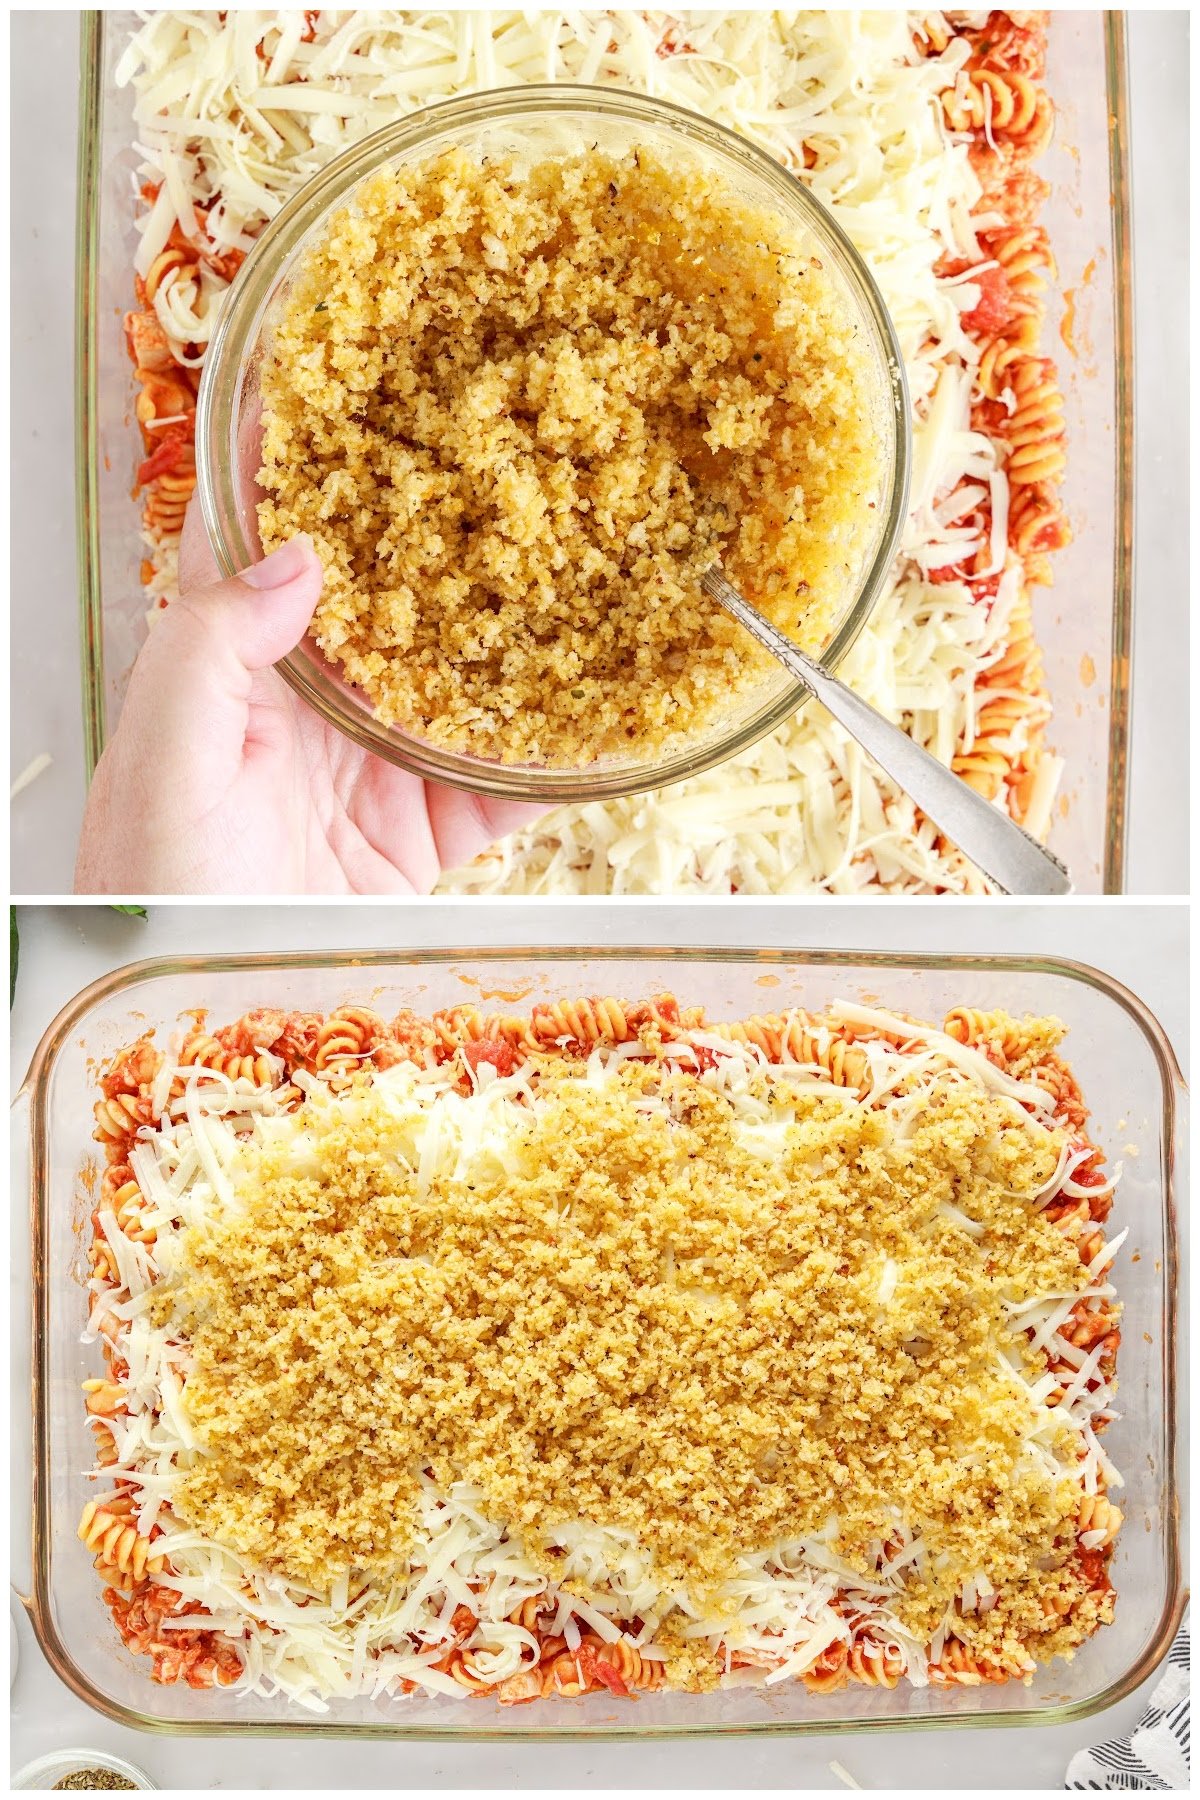 Bowl of Panko crust being mixed with butter and poured over the pasta bake.